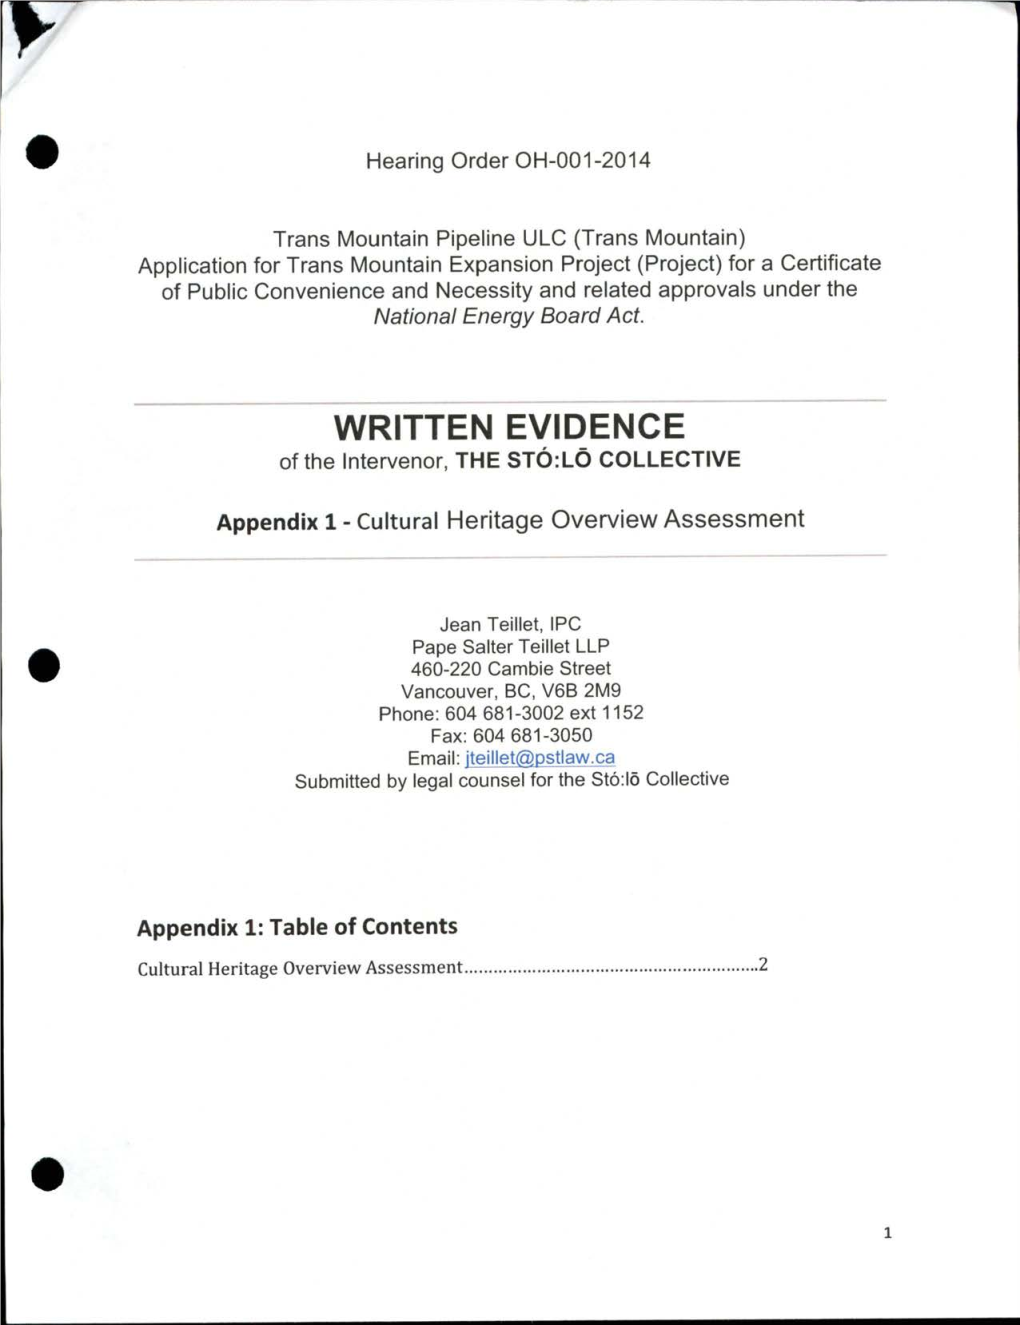 WRITTEN EVIDENCE of the Intervenor, the STO:LO COLLECTIVE